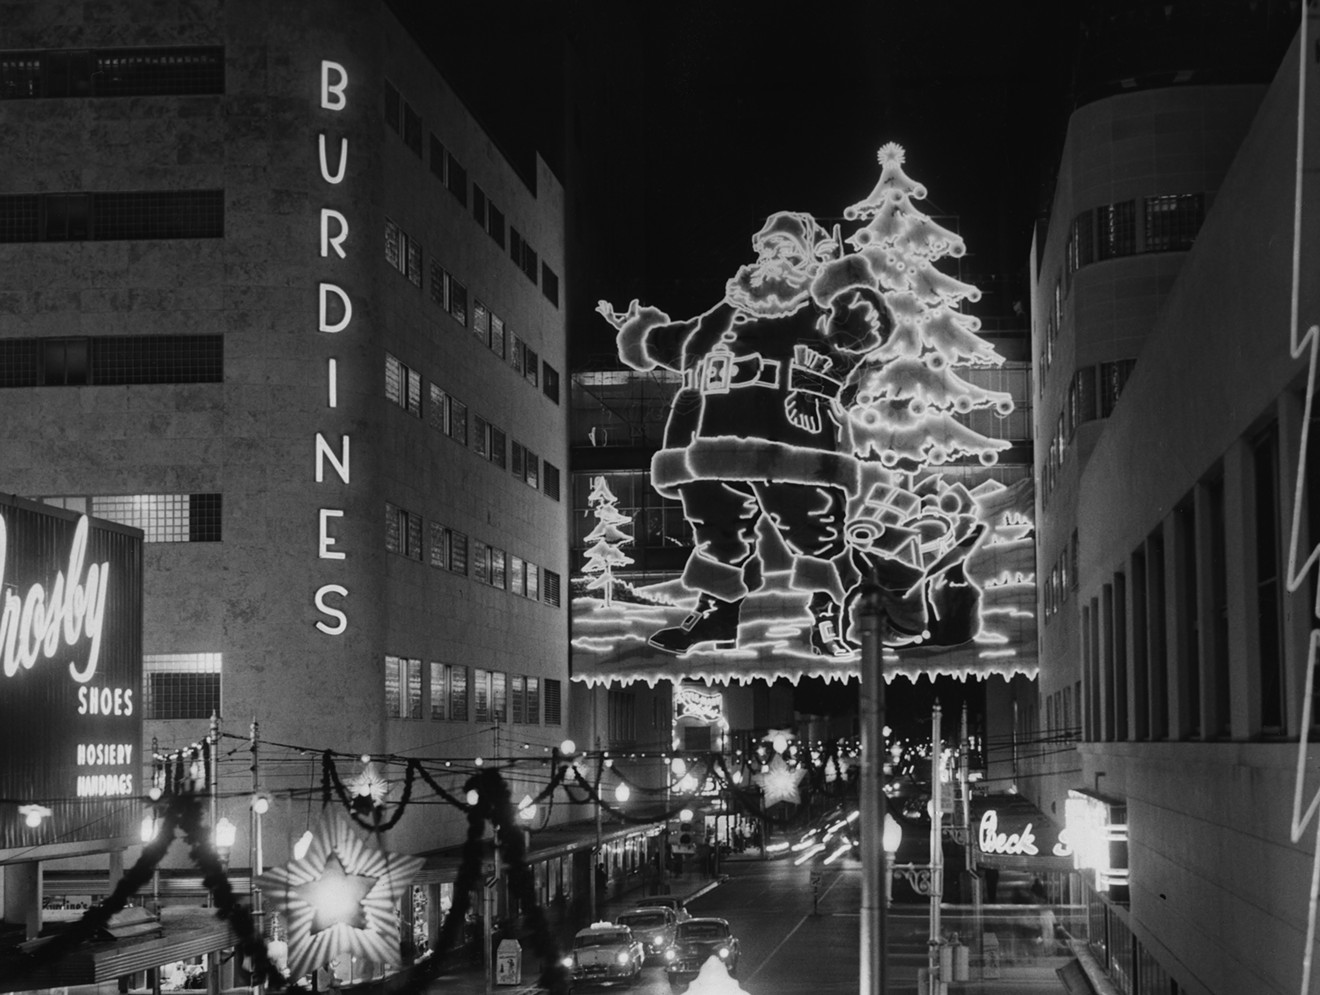 Burdines in downtown Miami, photographed here in 1950, was a major center of activity for the city for decades.